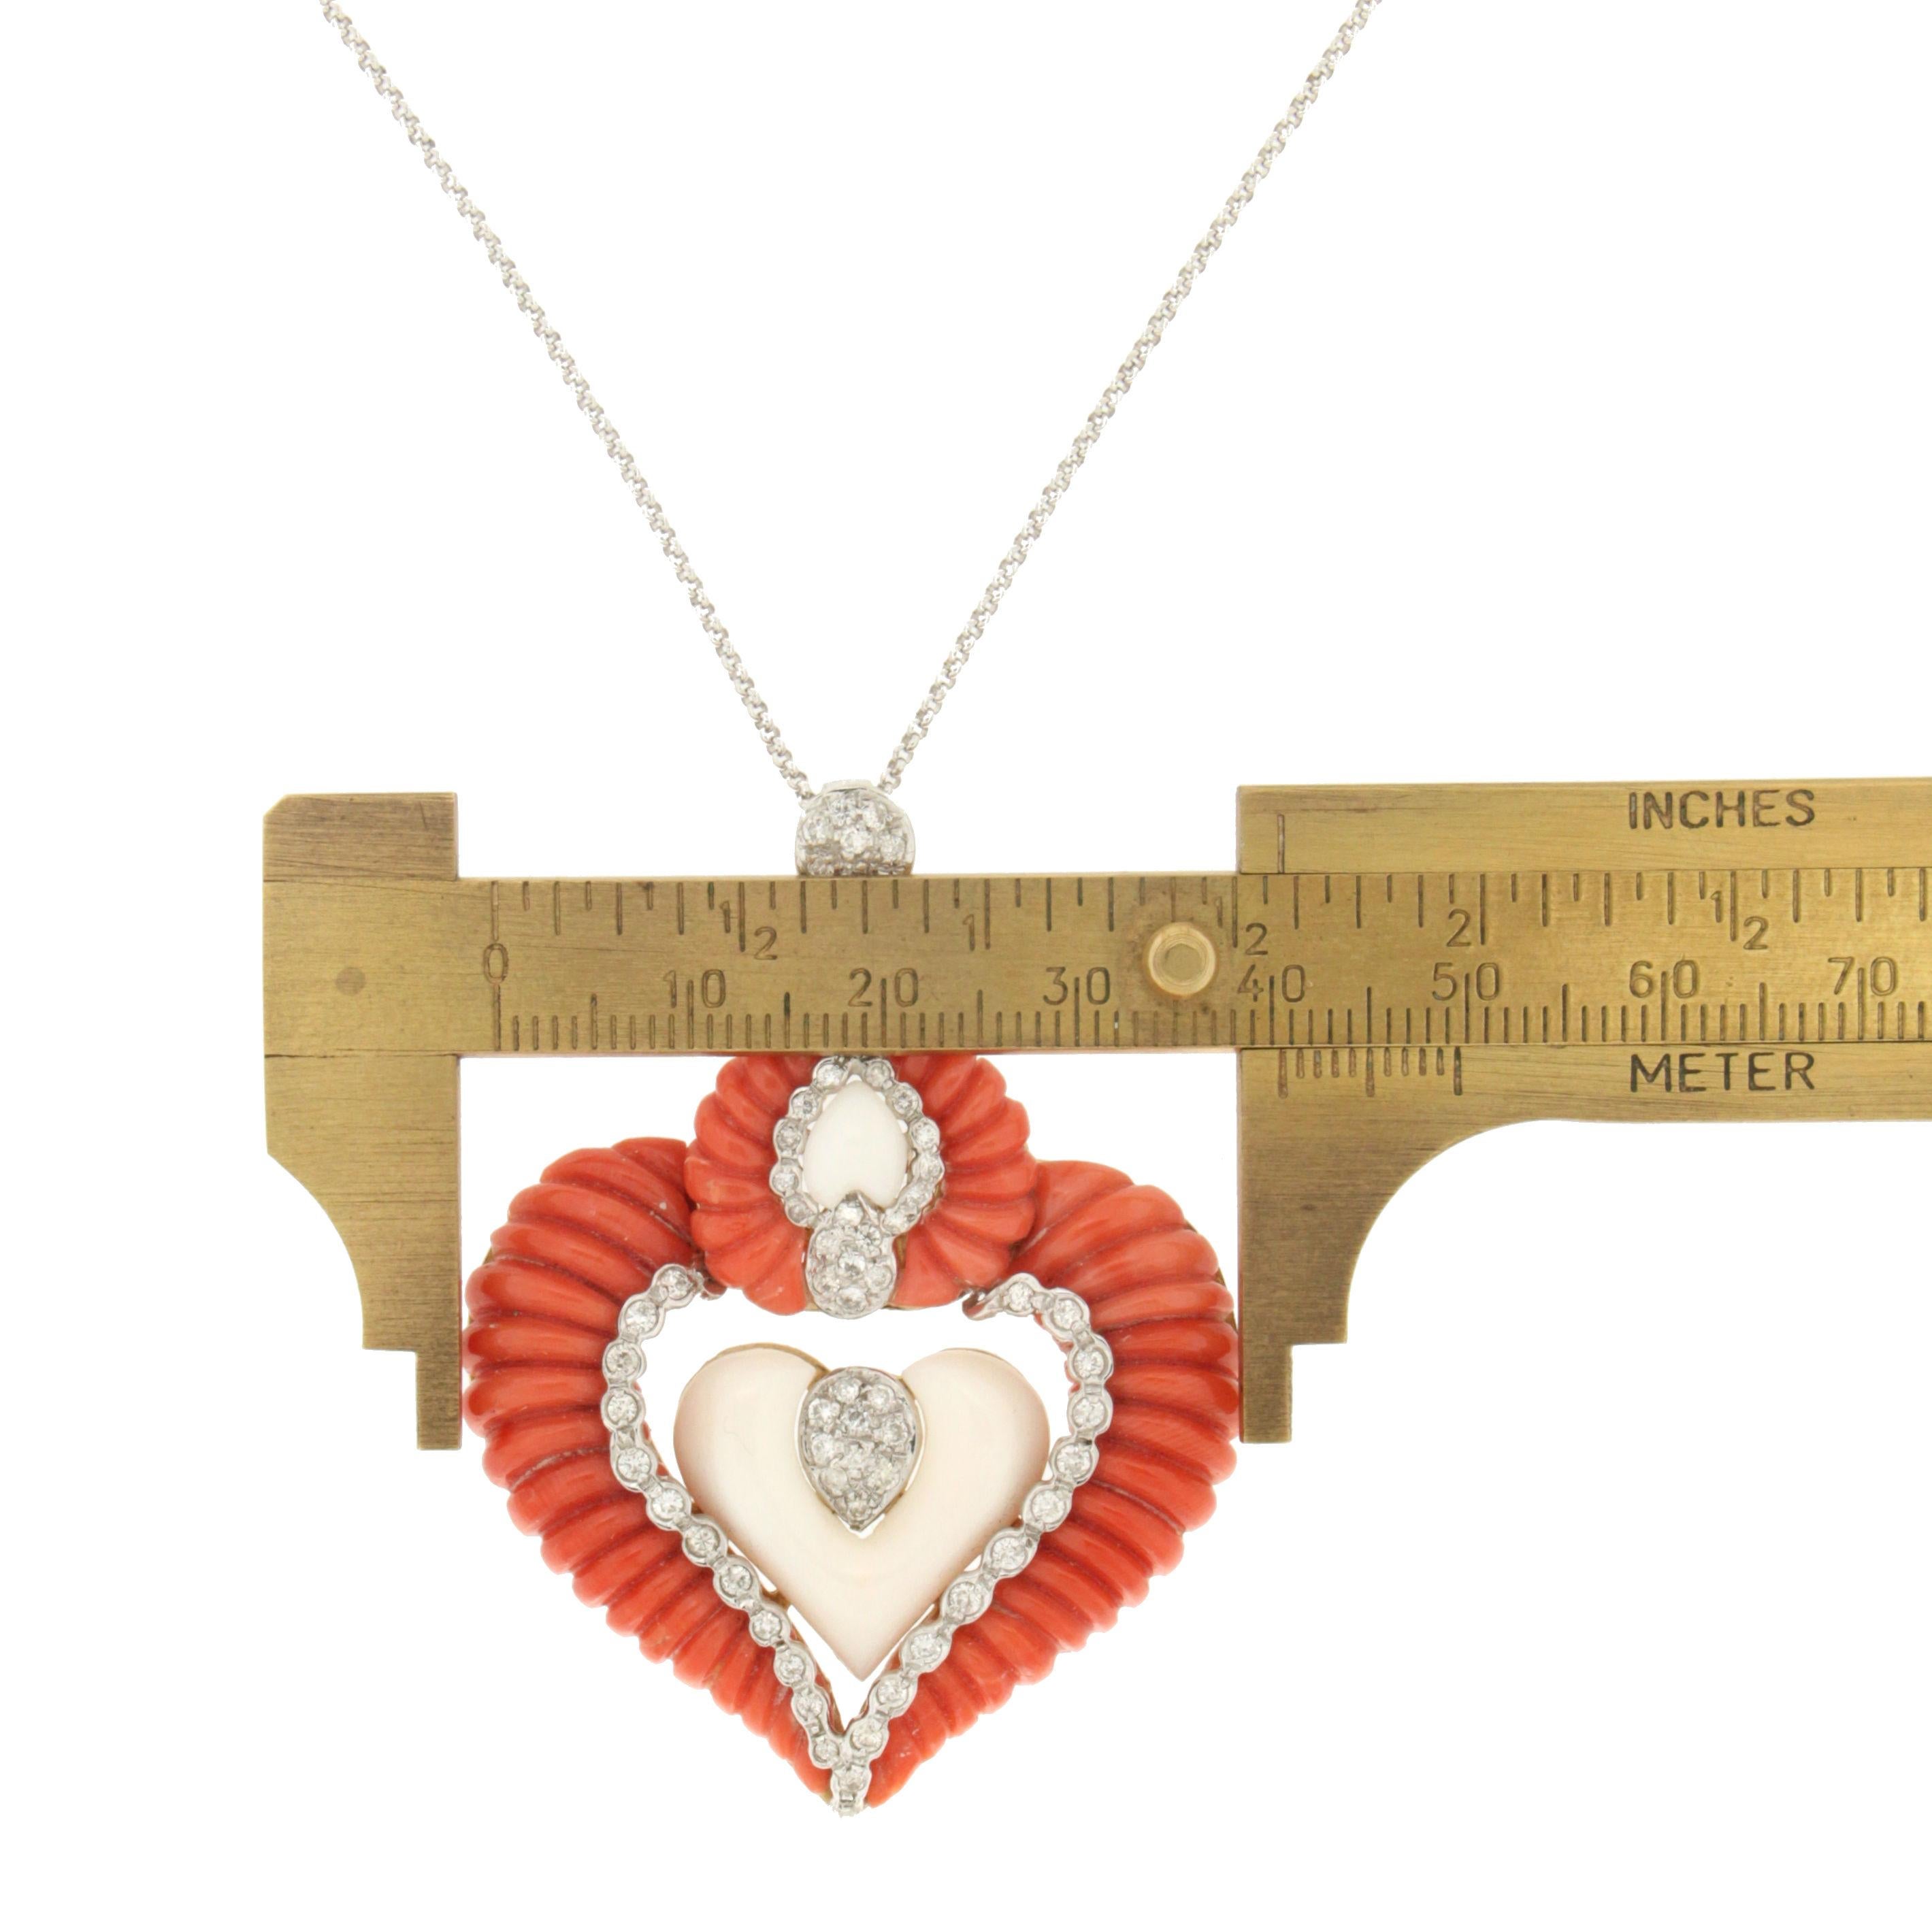 Women's or Men's Handcraft Coral Heart 18 Karat White and Yellow Gold Diamonds Pendant Necklace